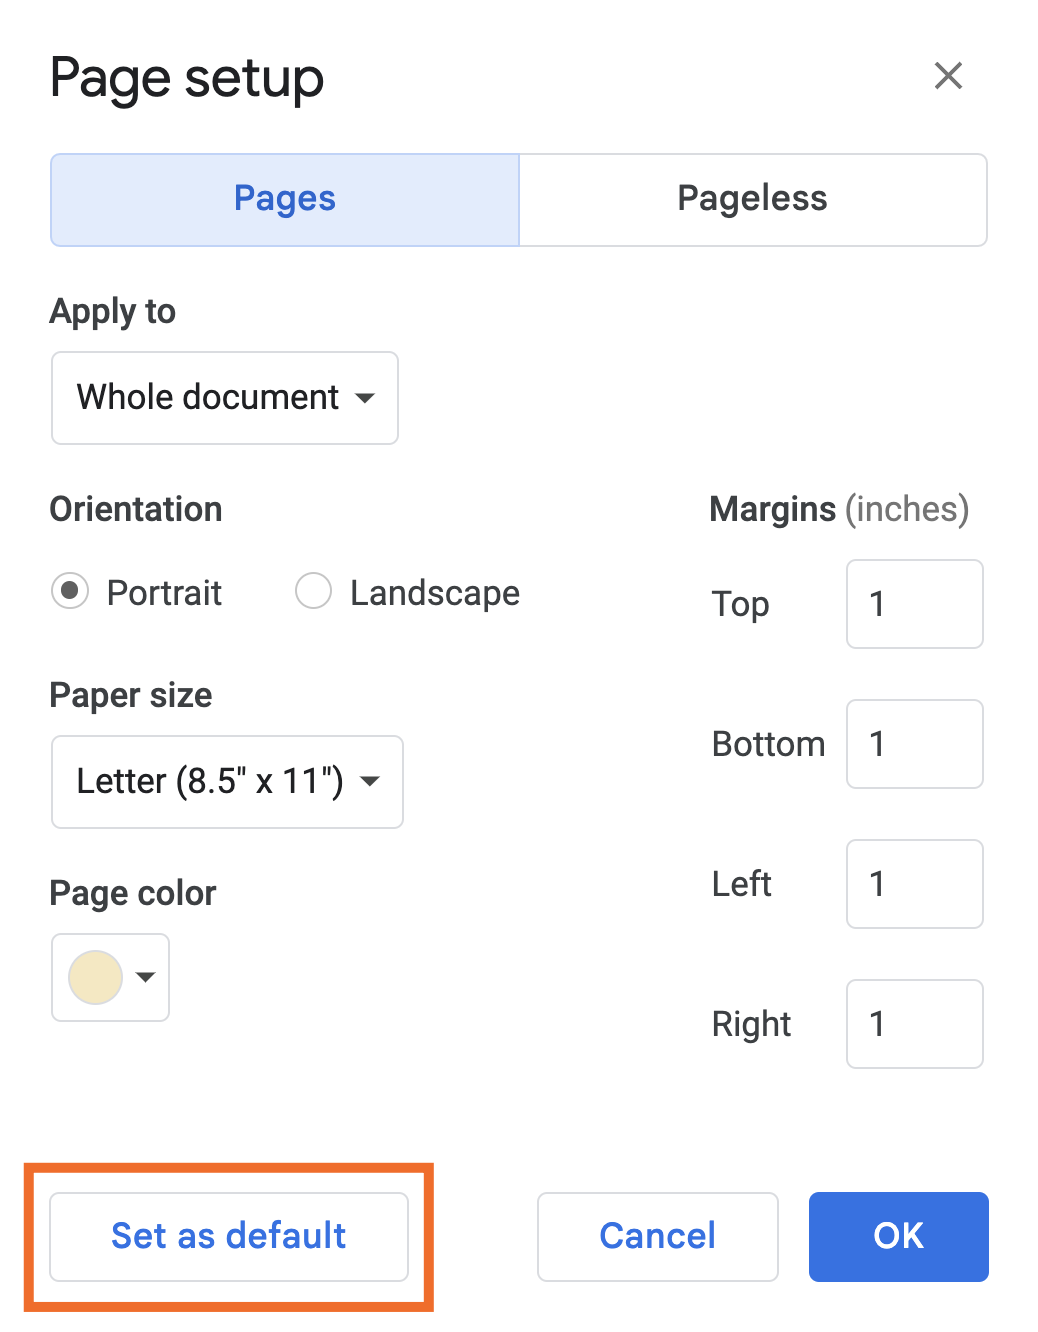 How to set the default page settings in Google Docs.